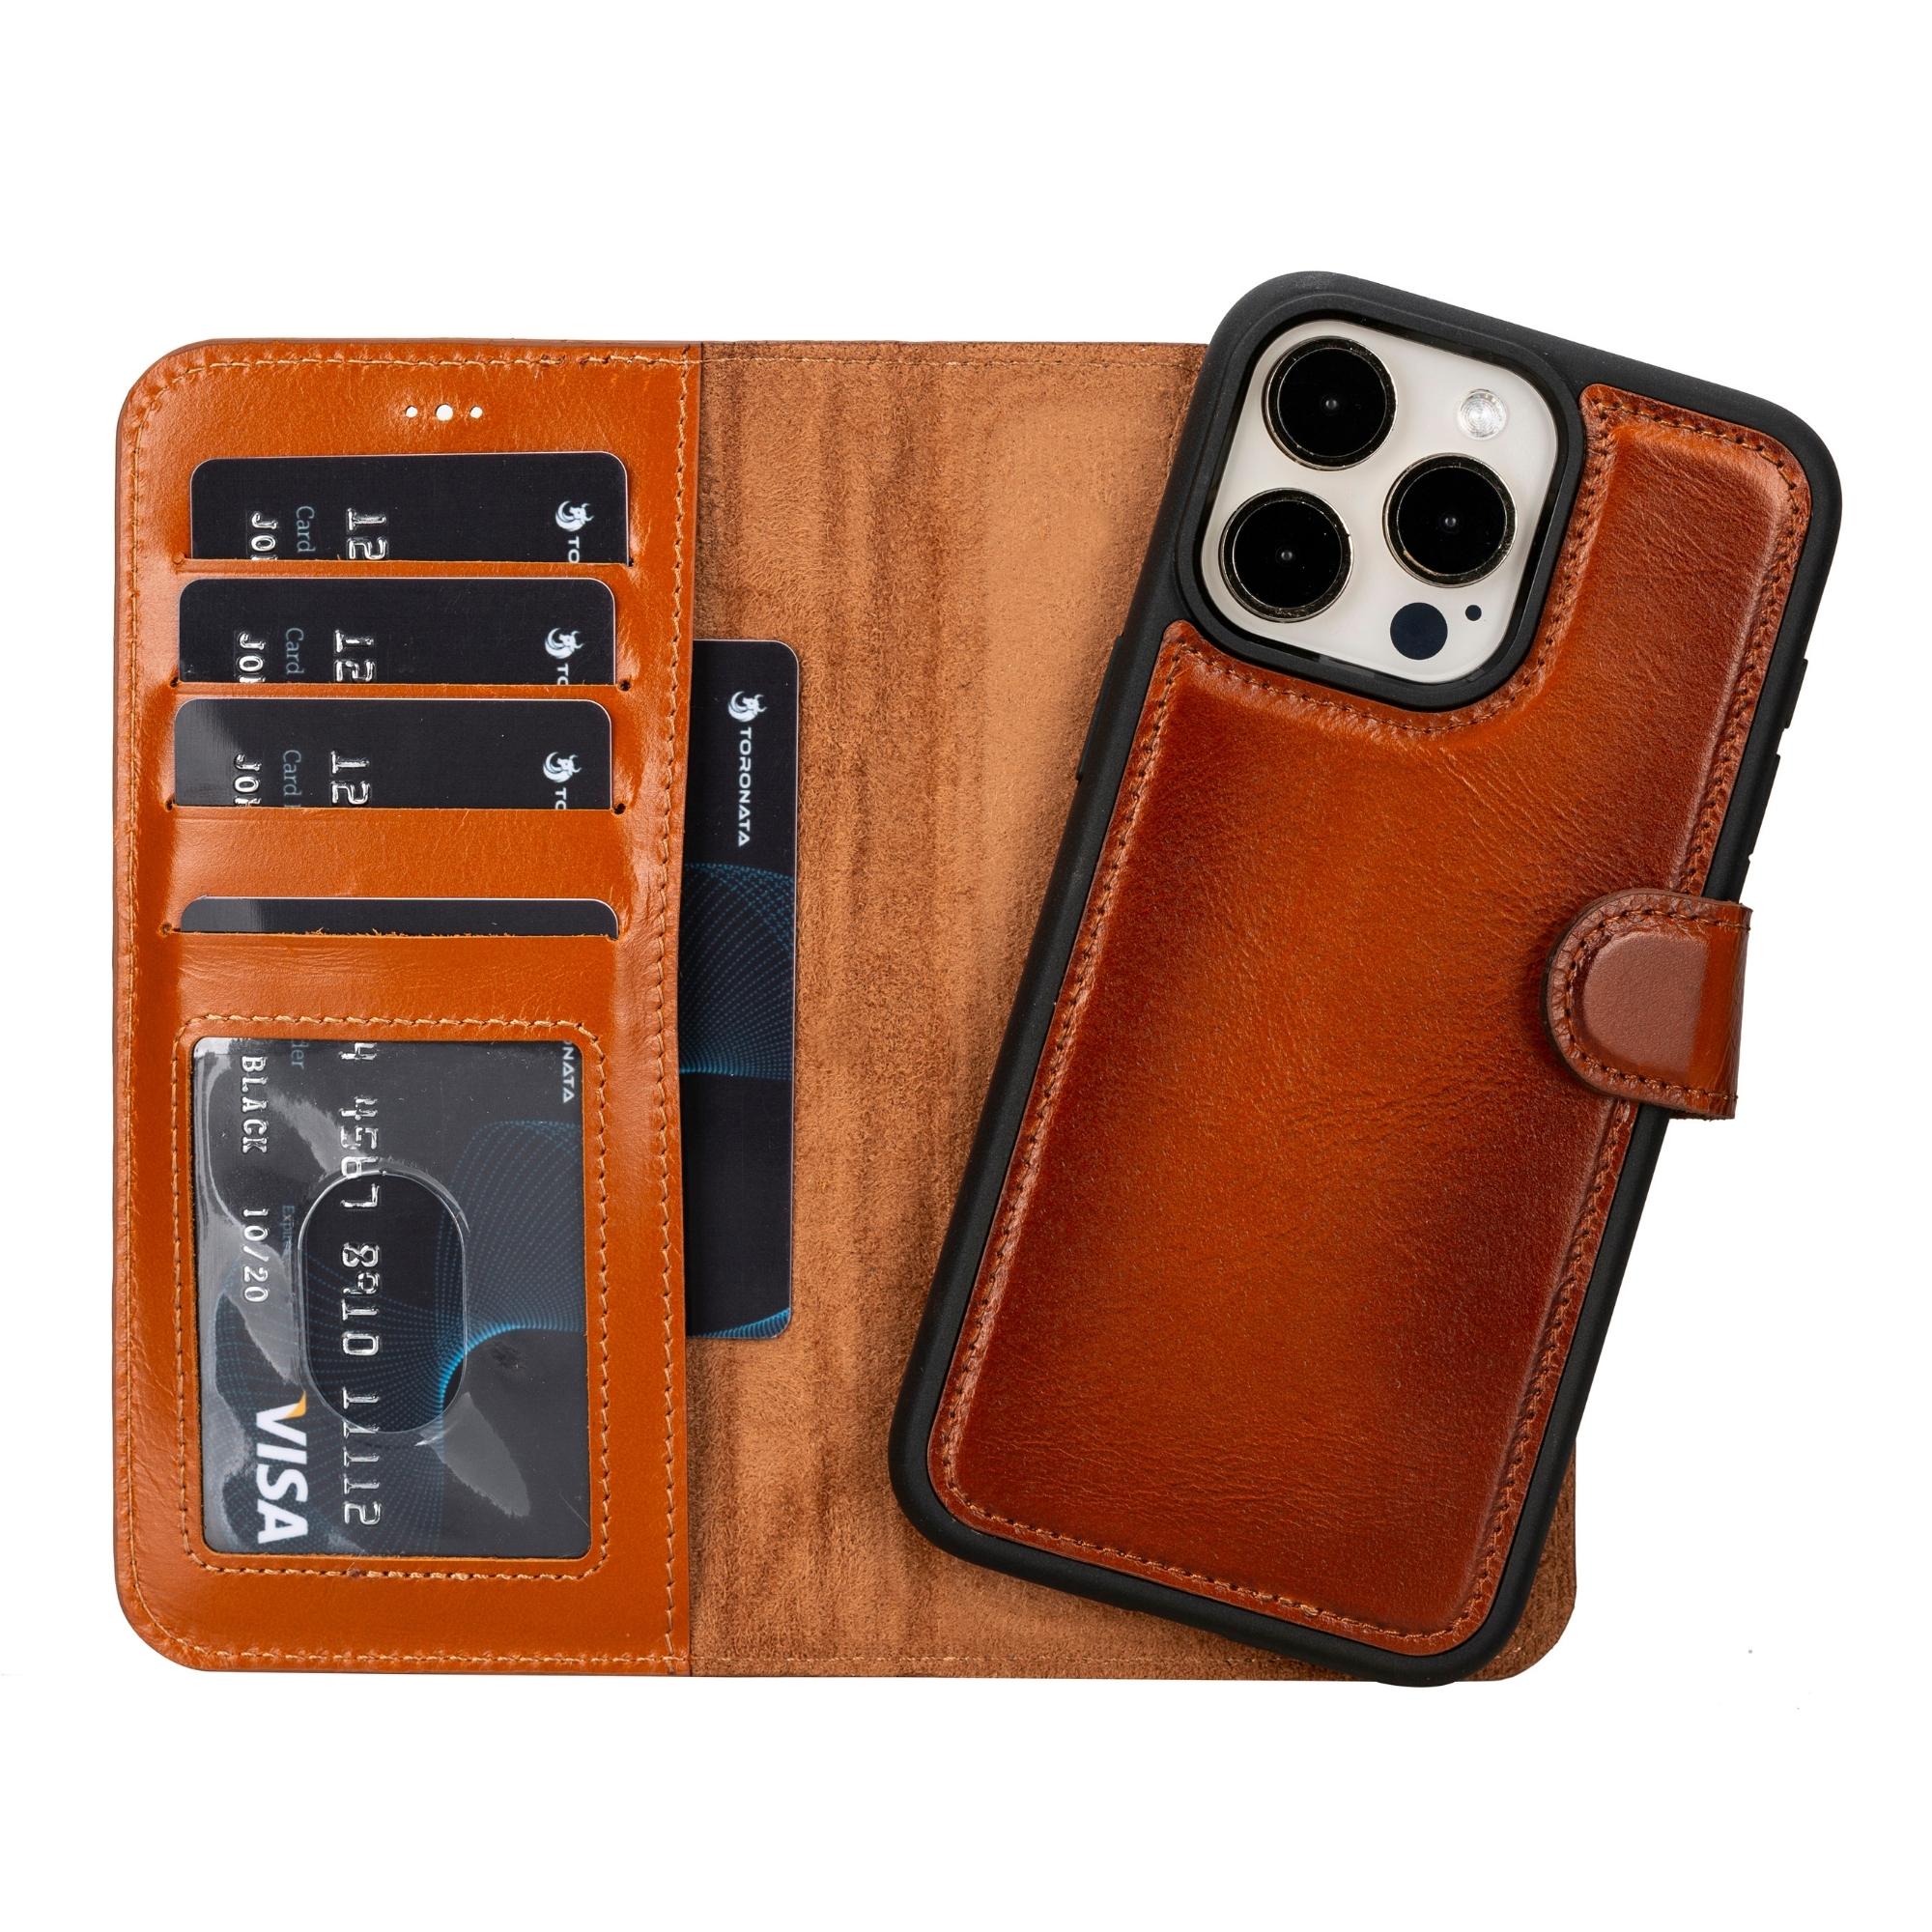 IPhone Leather Wallet With Magsafe High Quality Magnets 